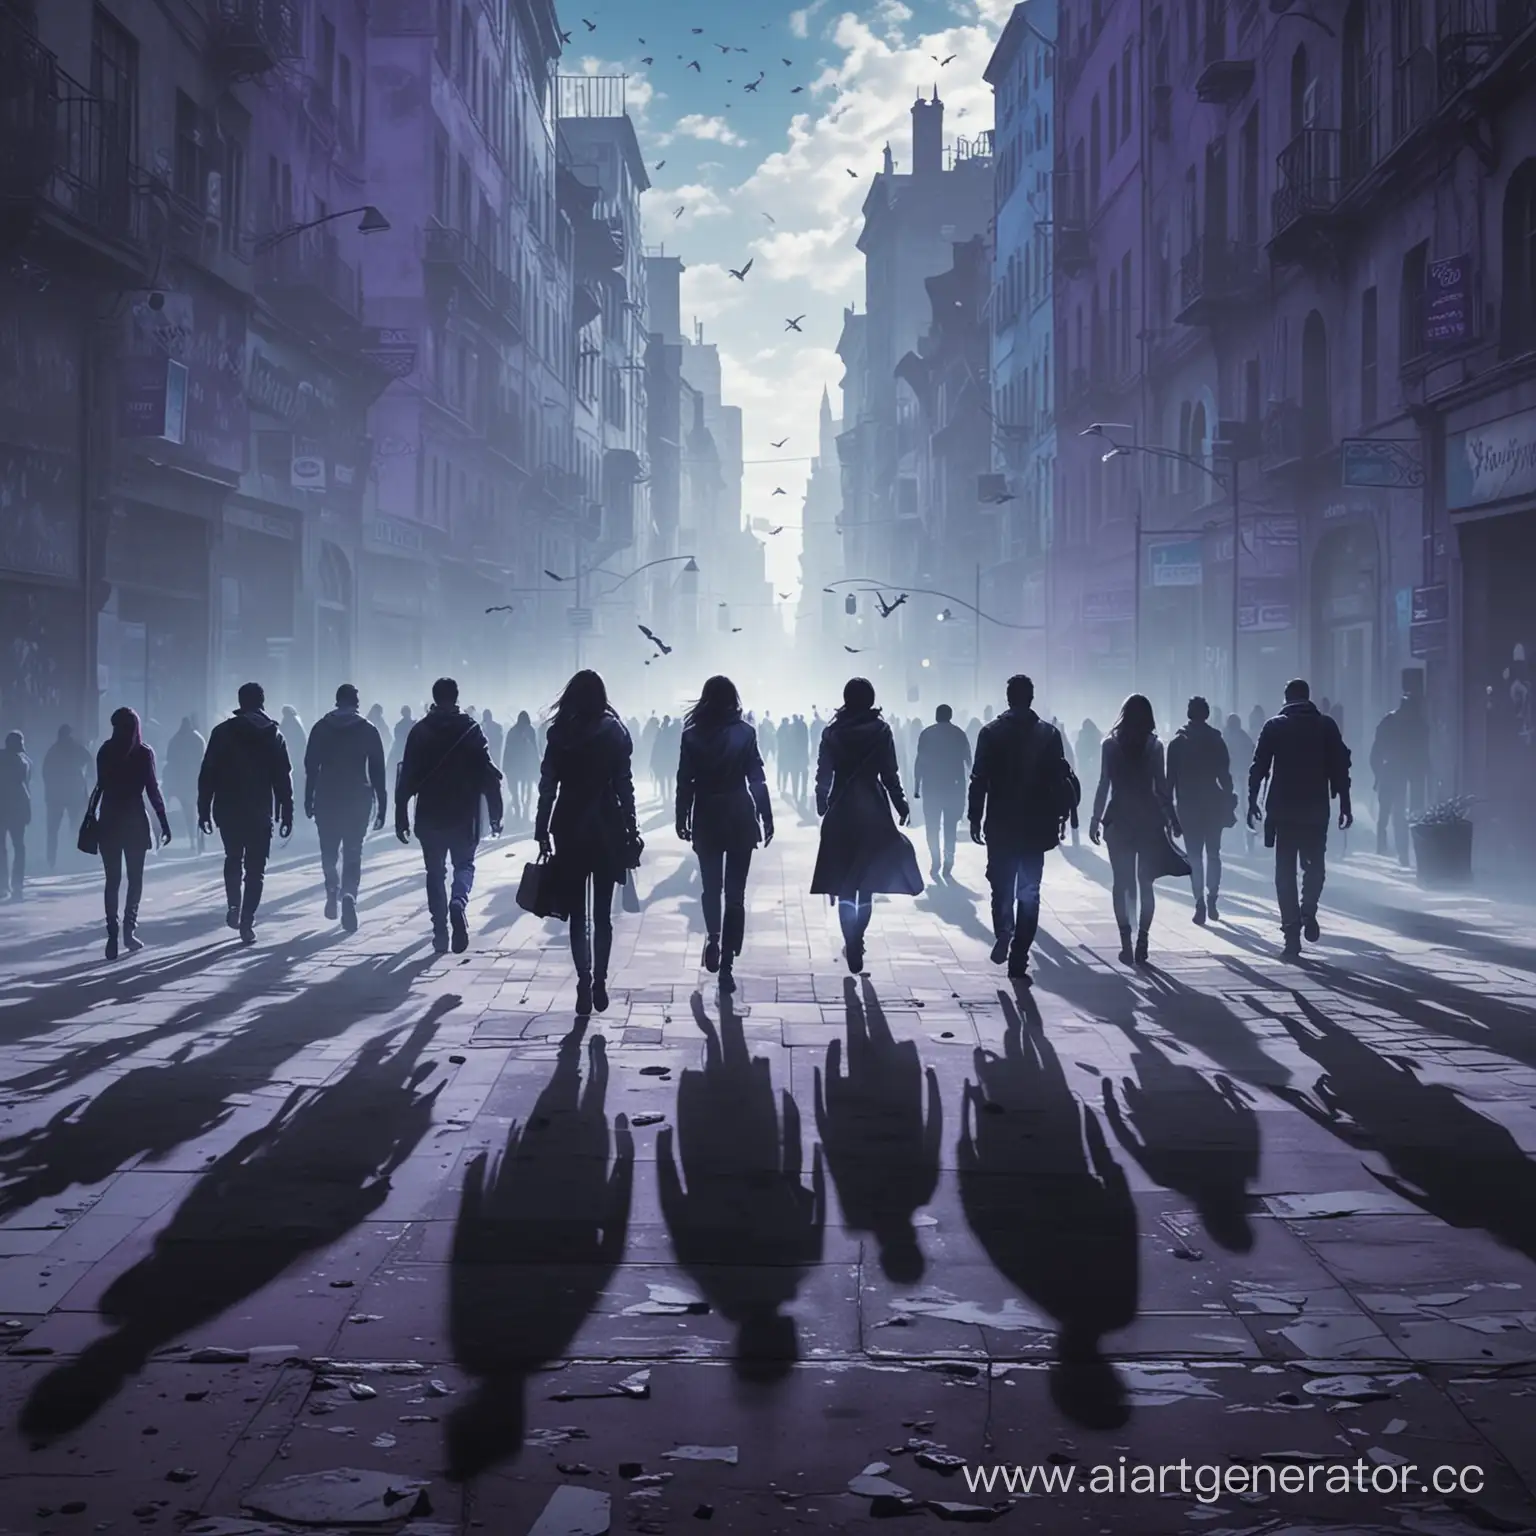 Urban-Fantasy-Silhouettes-Shadows-of-People-Flying-over-Cityscape-in-Gray-Blue-Purple-Realism